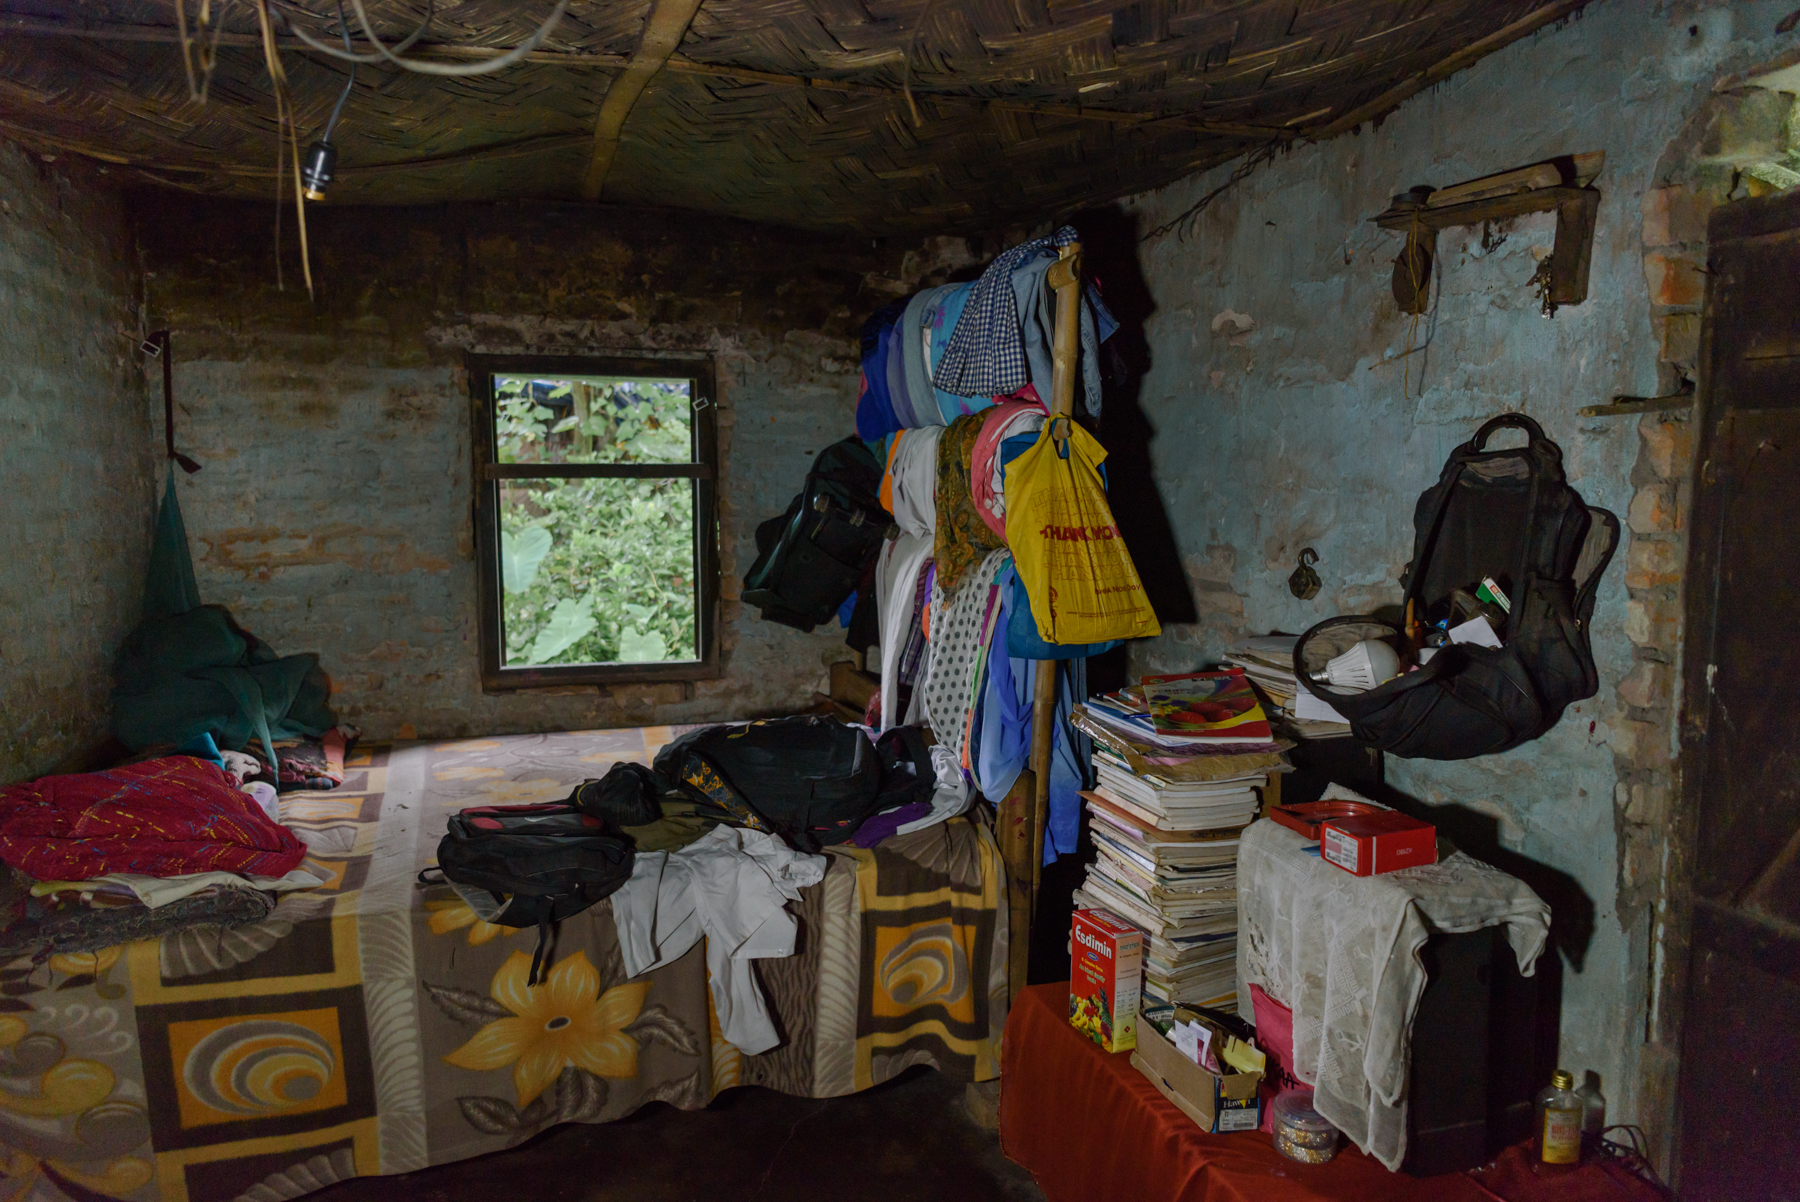  The house of Champa Soren, 35, who was trafficked in 2014 from the Chengmari Tea Garden. Champa used to be severely beaten by her abusive husband. To escape that, Champa fell into the hands of a trafficker who promised her a job and took her to Delh